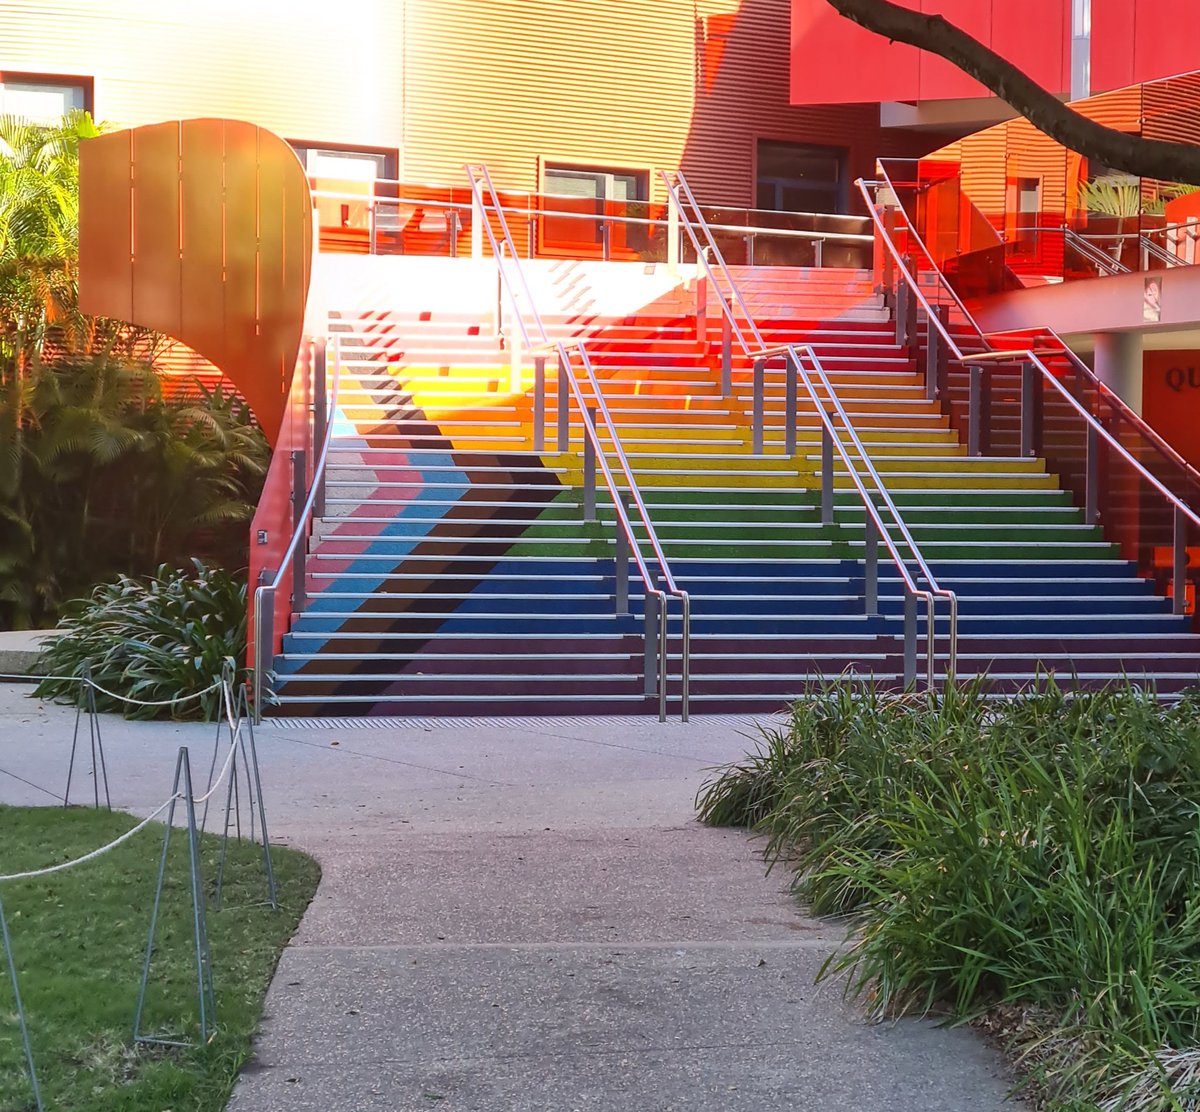 Sometimes it's the little things you see out and about that makes you smile. 
Like these Pride stairs.